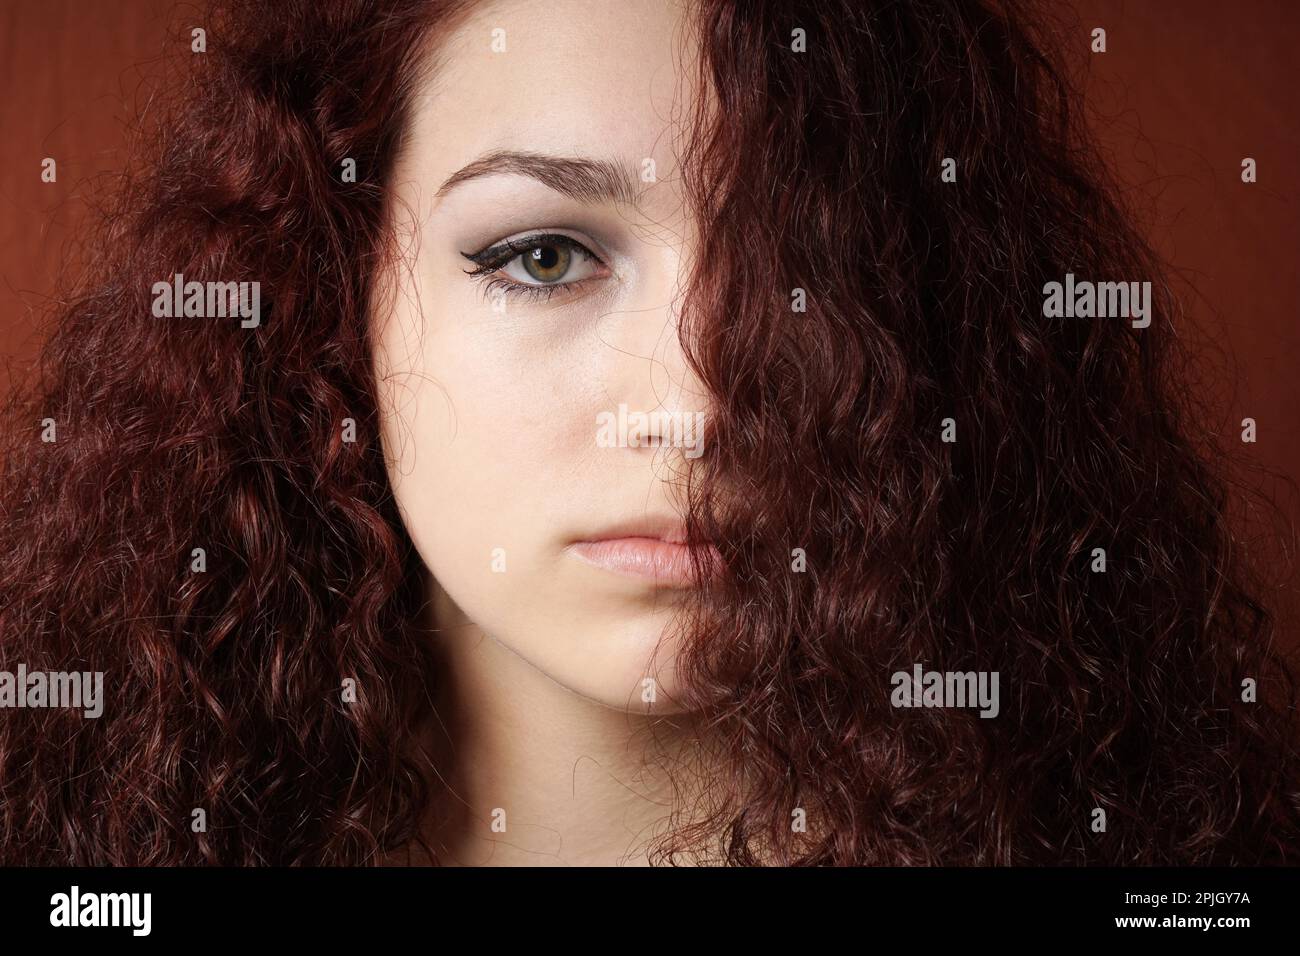 portrait of sullen girl with natural curly long hair Stock Photo - Alamy